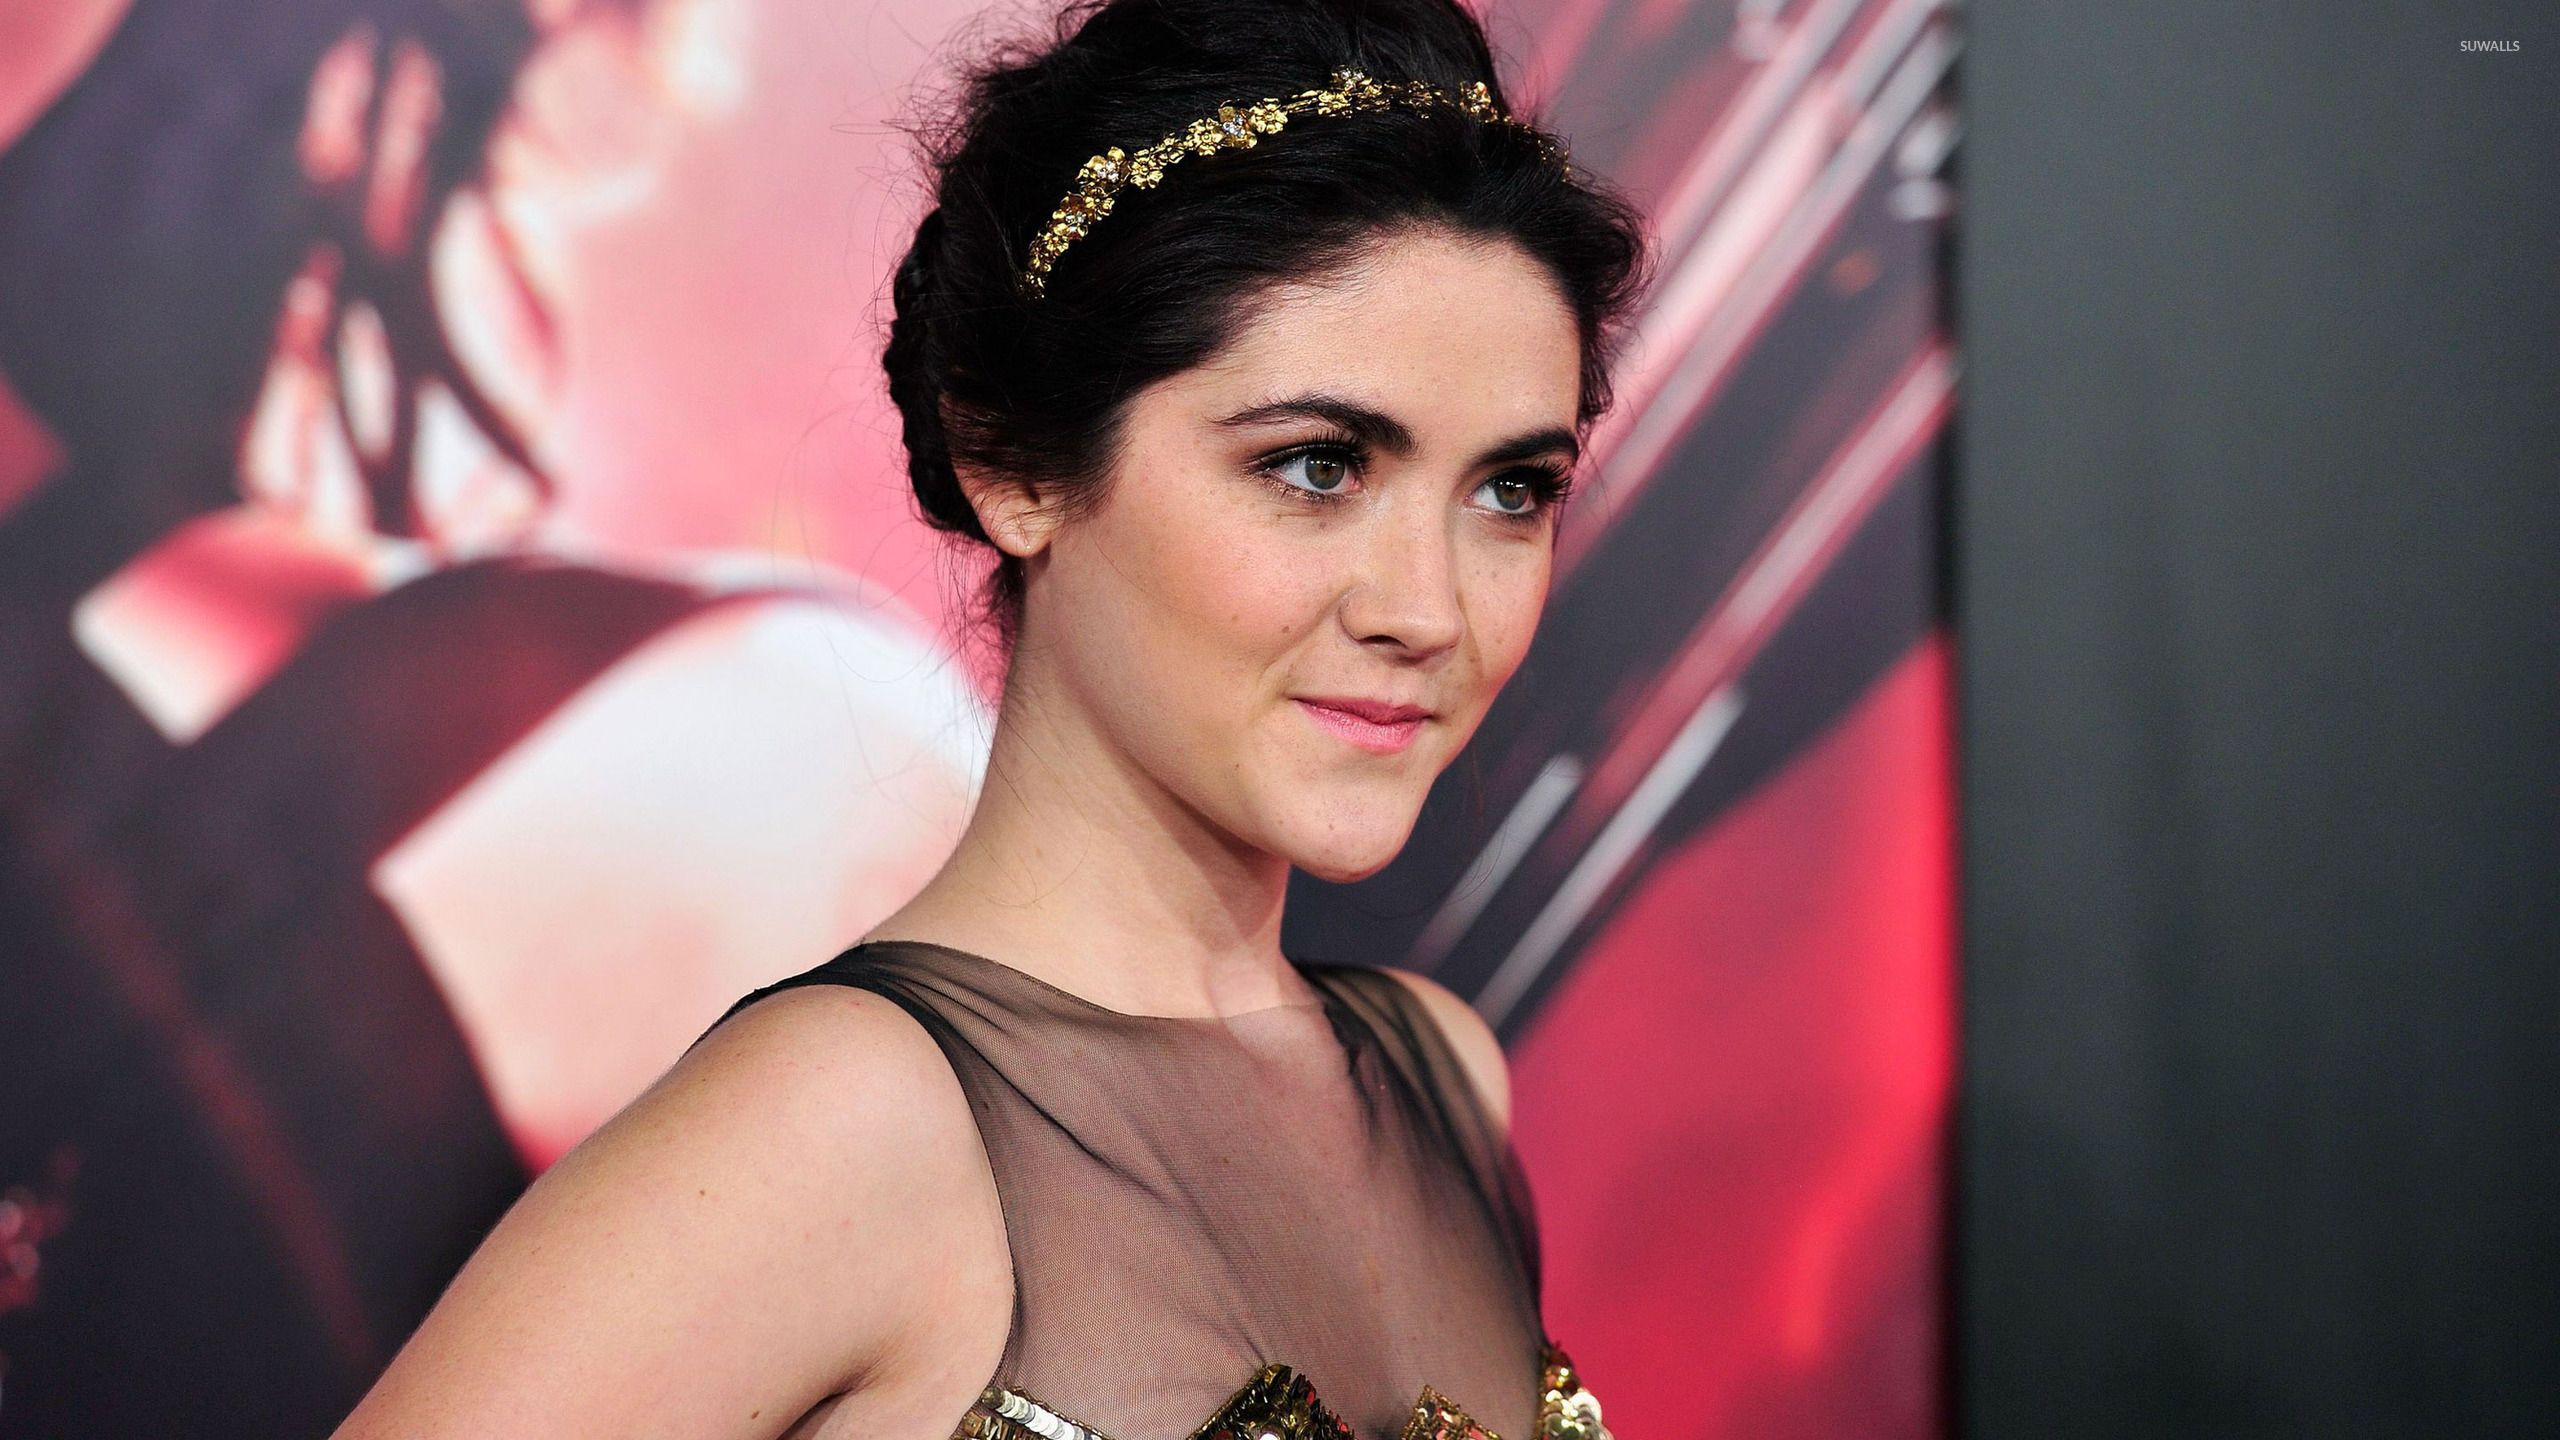 Isabelle Fuhrman Wiki Biography Age Height Weight Profile Info